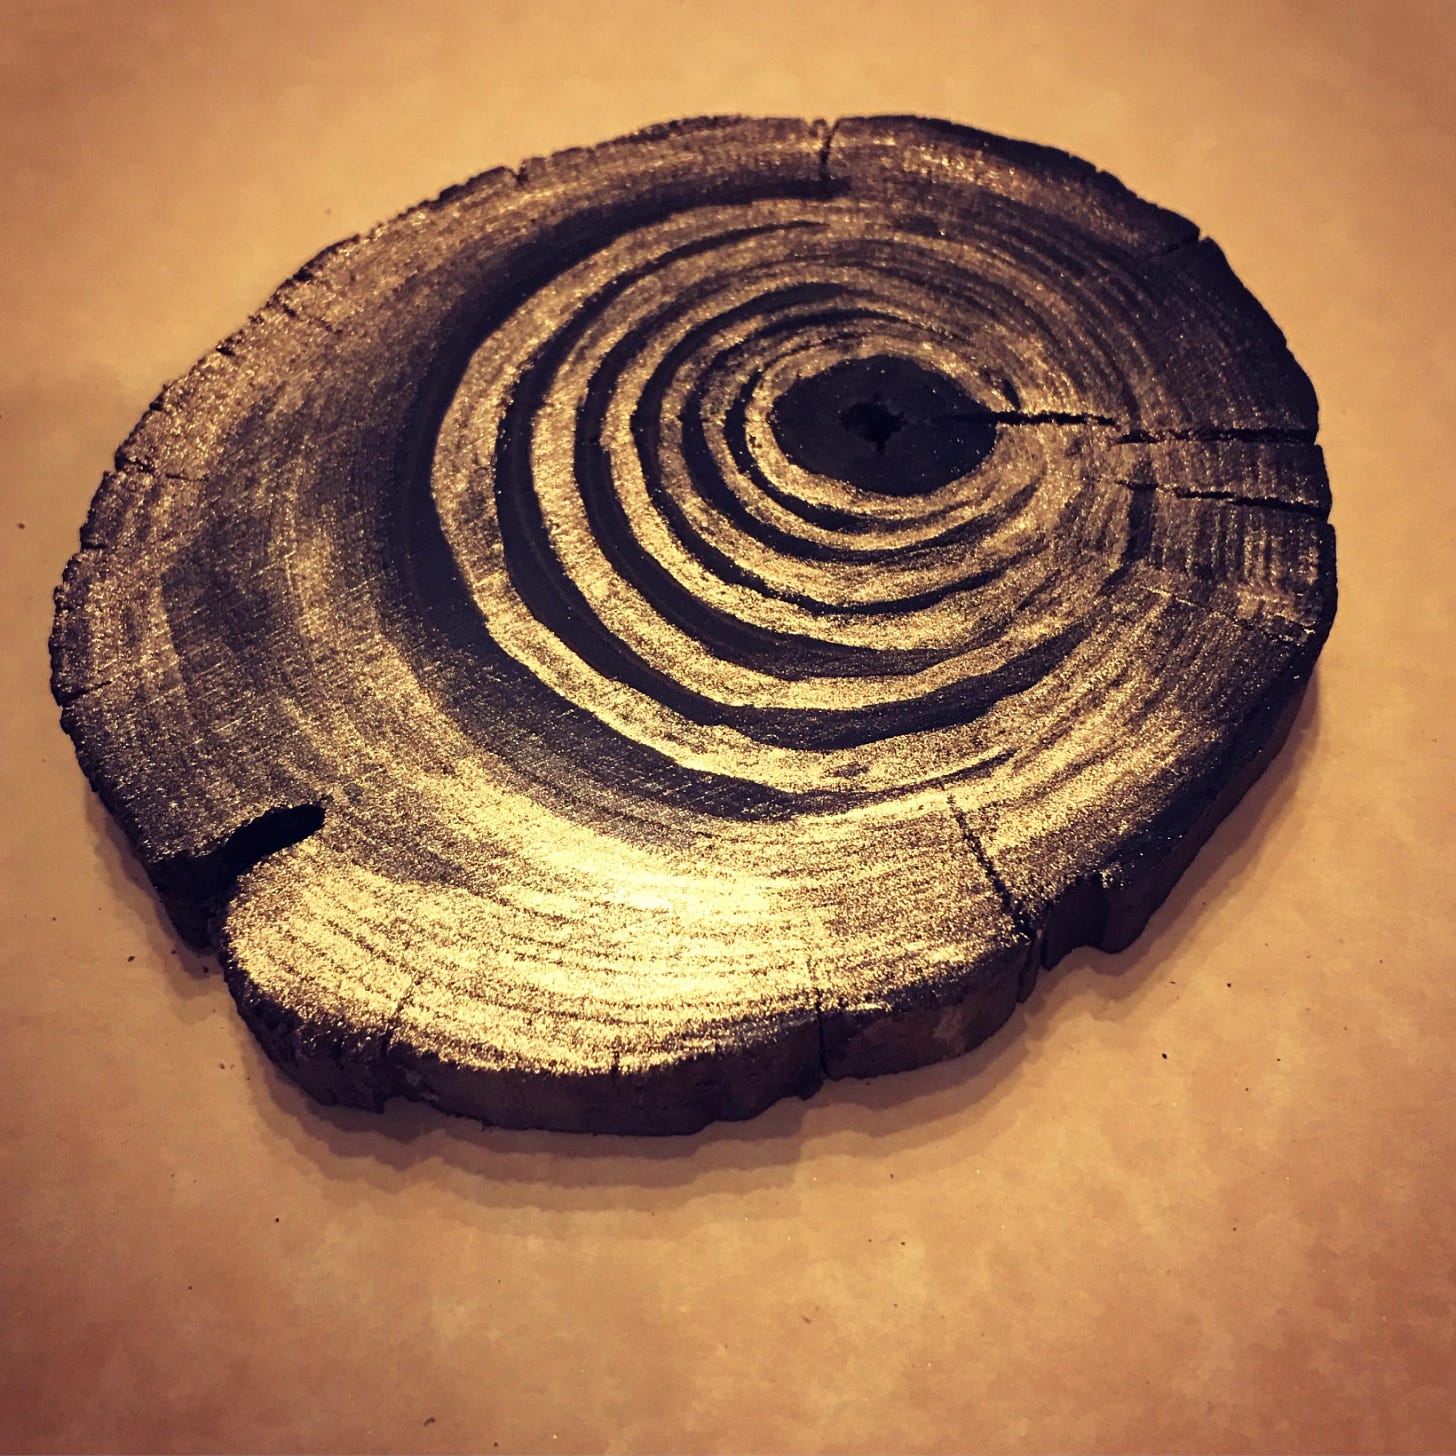 slice of a tree showing the rings, which I have illuminated with my homemade gold ink –a conceptual piece for #Inktober about accumulation of pollution in tree rings near copper mining & smelting operations, something I’ve worked magic with in my book, based on my experiences in SLC